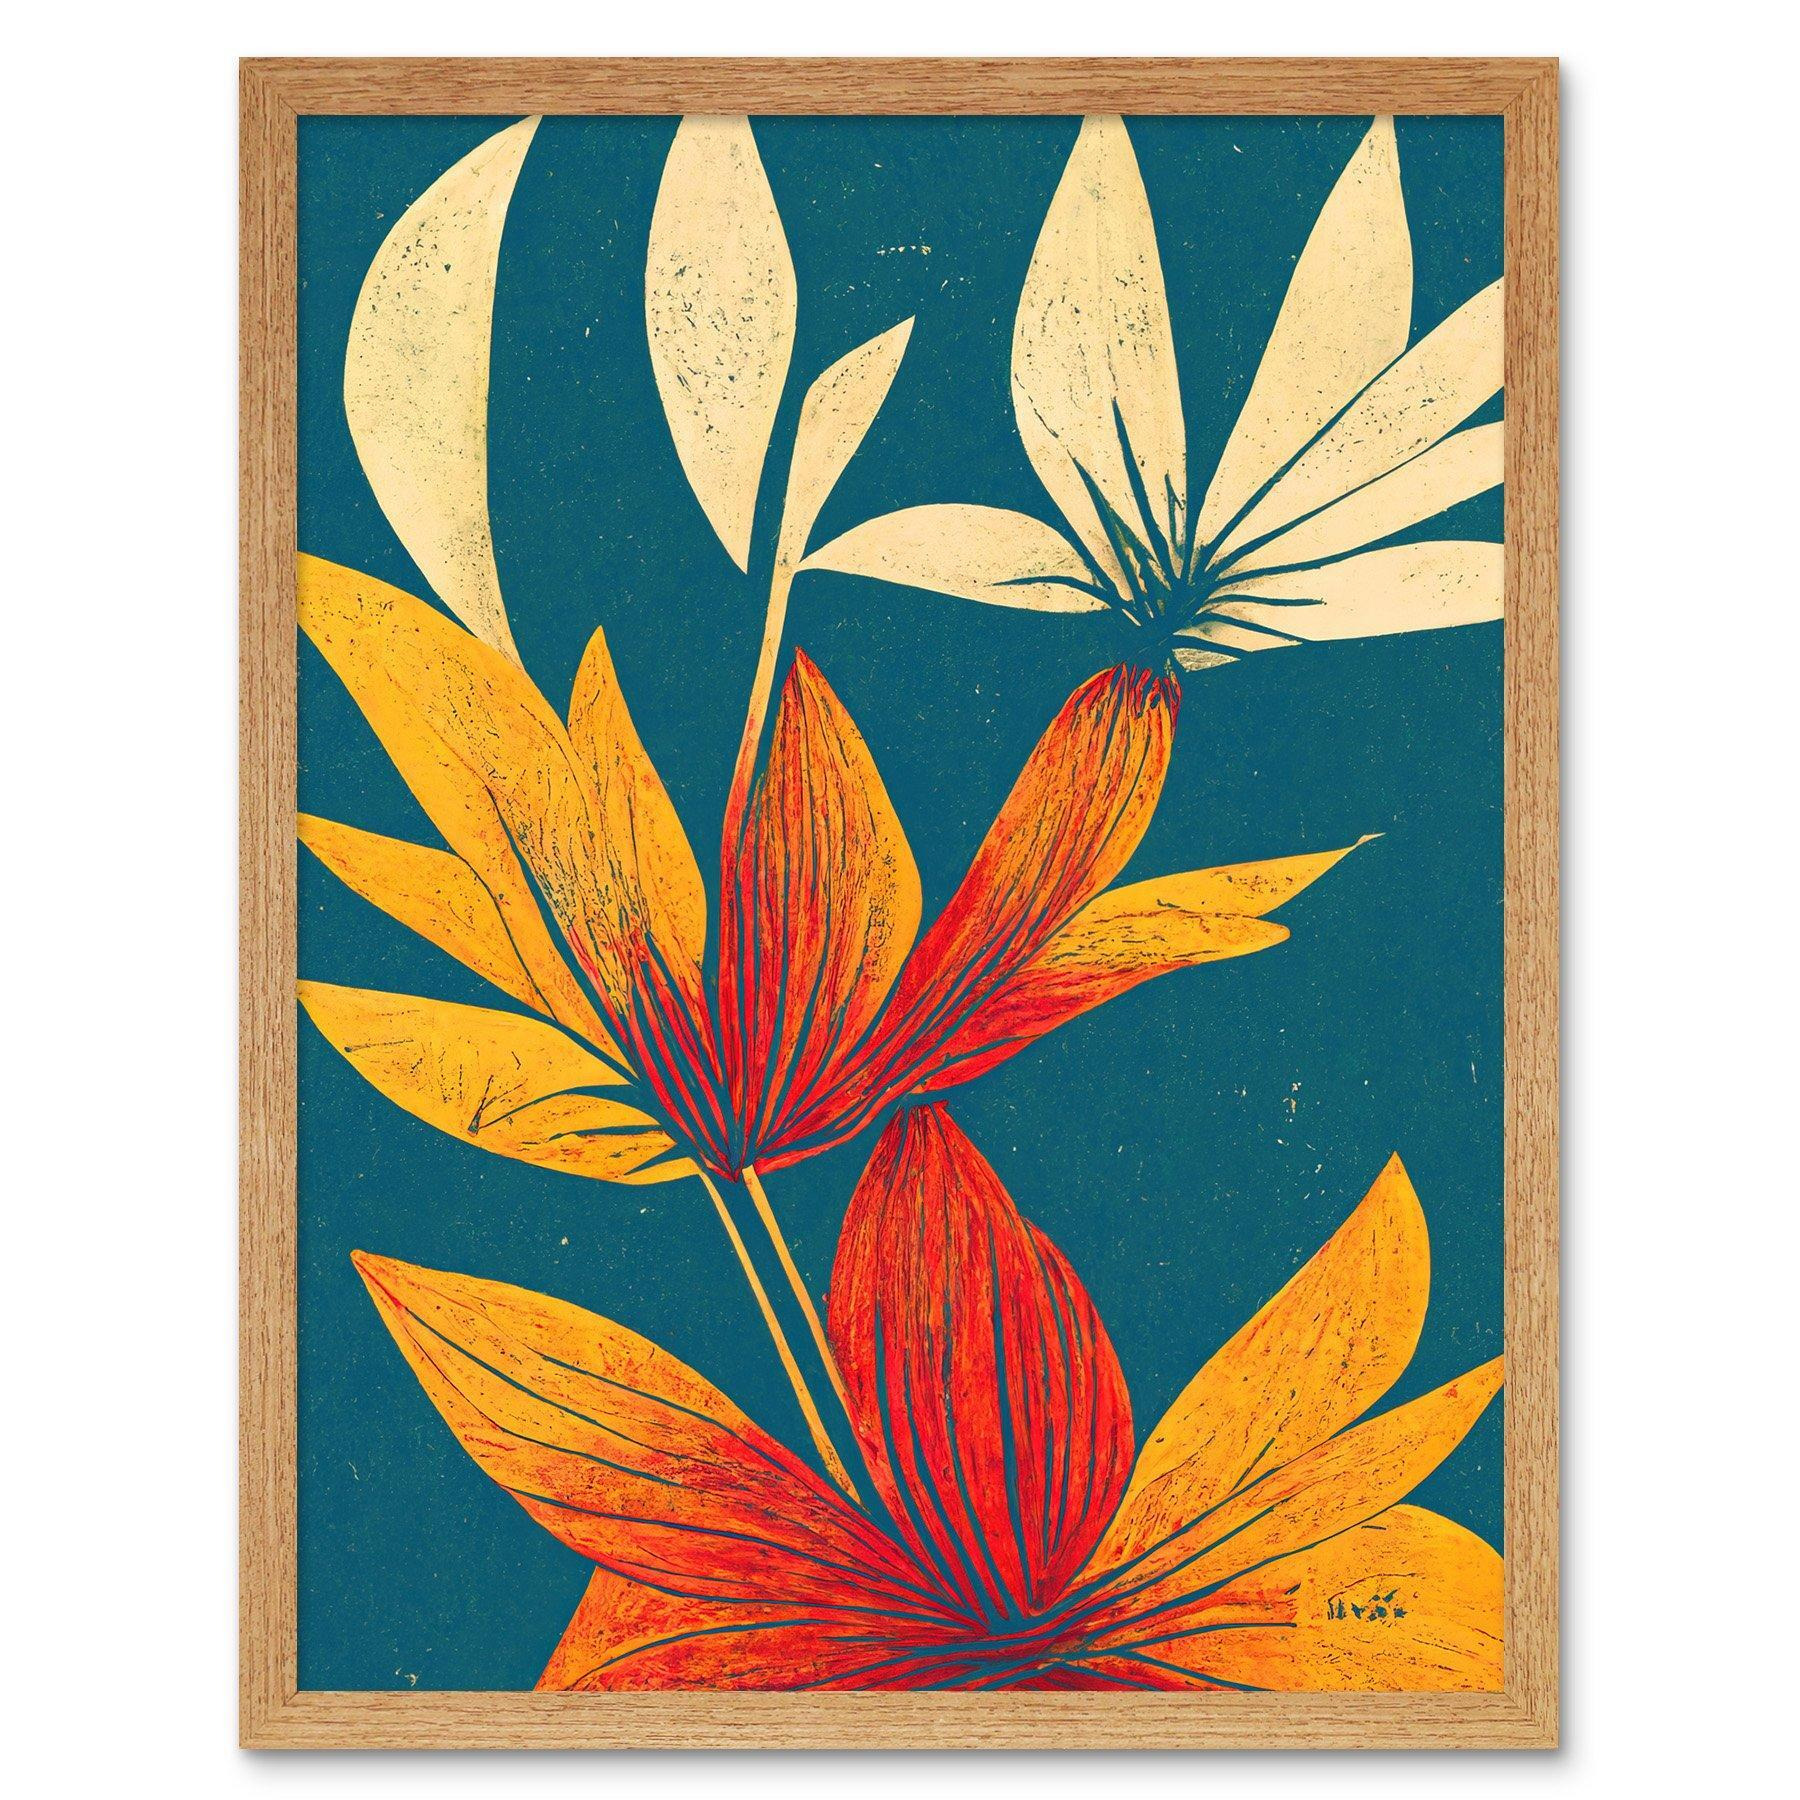 Abstract Tropical Leaf Linocut Flowers Blue Gold Art Print Framed Poster Wall Decor 12x16 inch - image 1